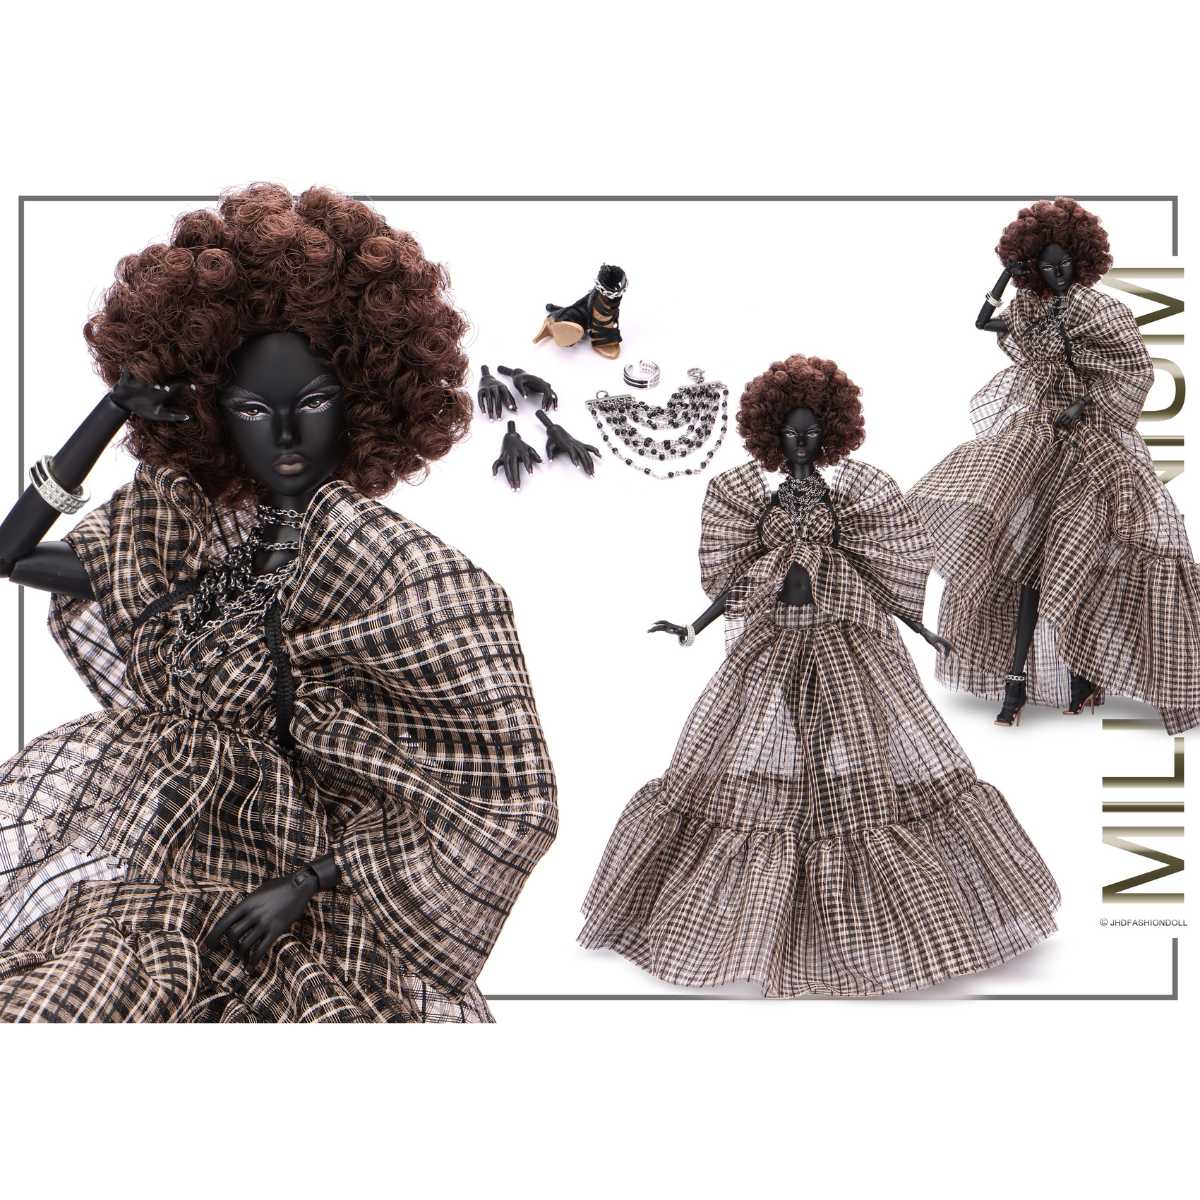 MILLENNIUM: BEAUTY AT THE MET Anna May Doll M2323 JHDFASHIONDOLL - Simon's Collectibles